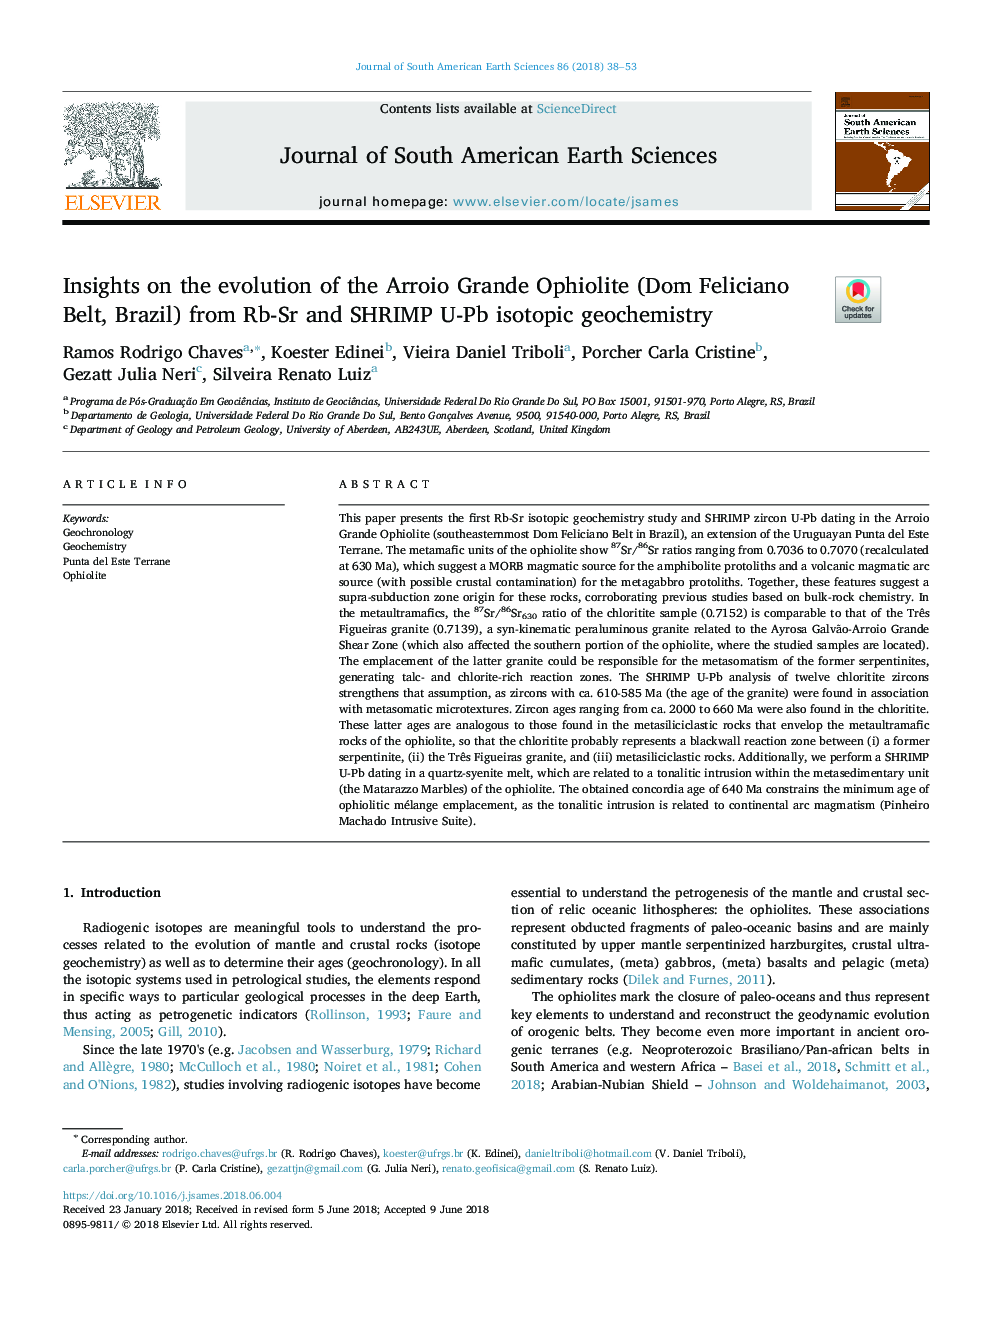 Insights on the evolution of the Arroio Grande Ophiolite (Dom Feliciano Belt, Brazil) from Rb-Sr and SHRIMP U-Pb isotopic geochemistry